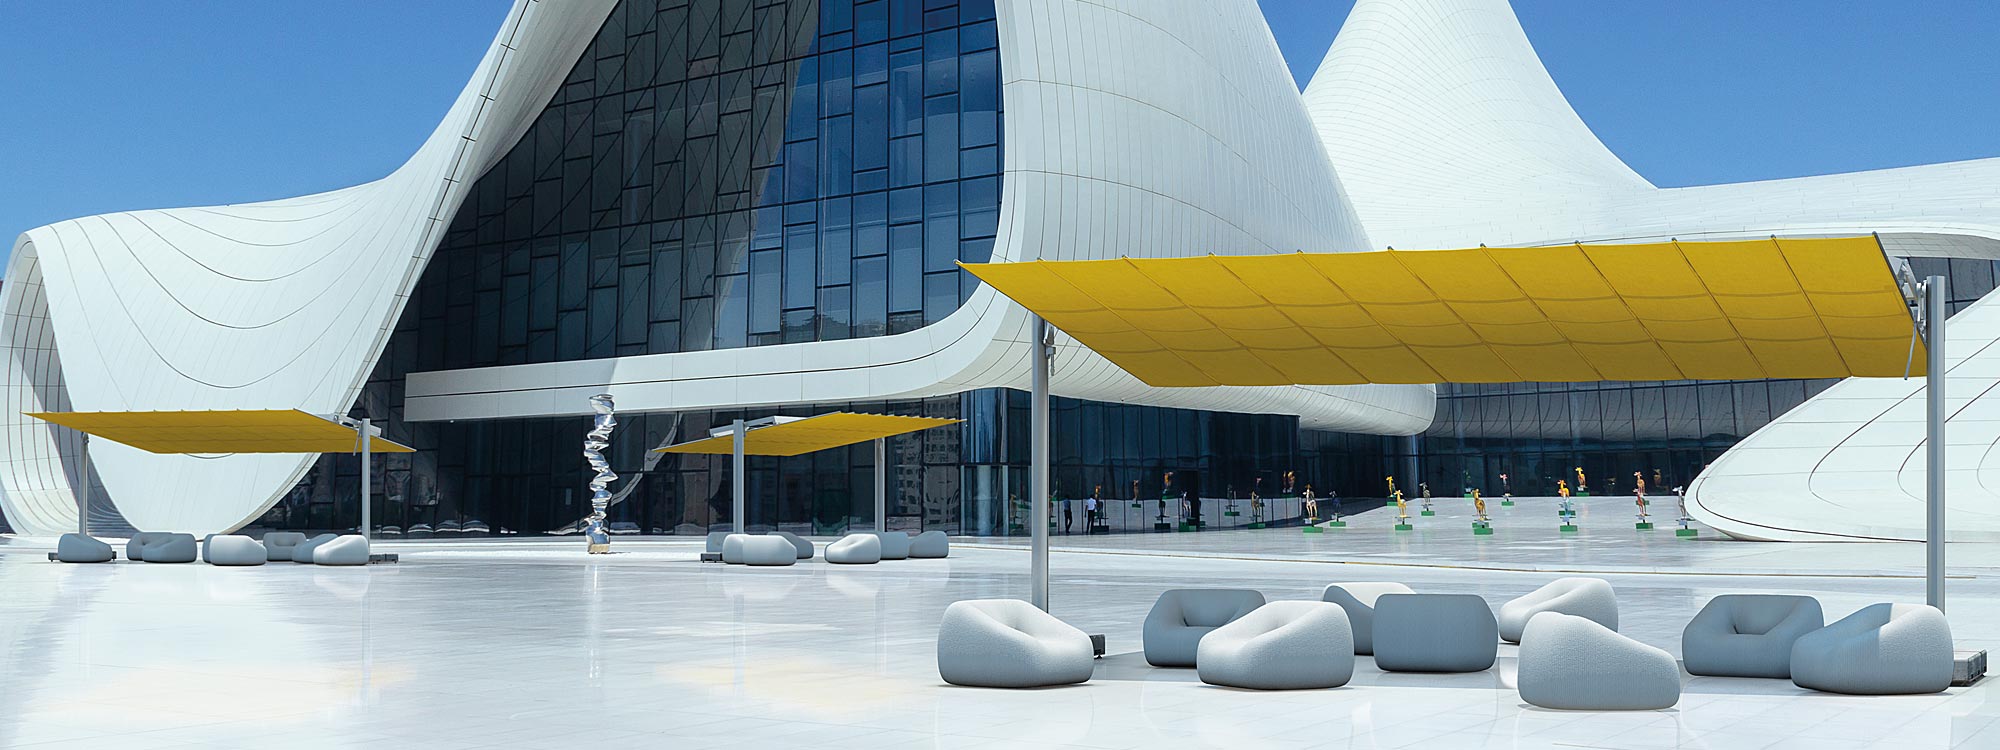 Image of FIM Flexy Large free-standing awnings with yellow canopies in front of large modernist building